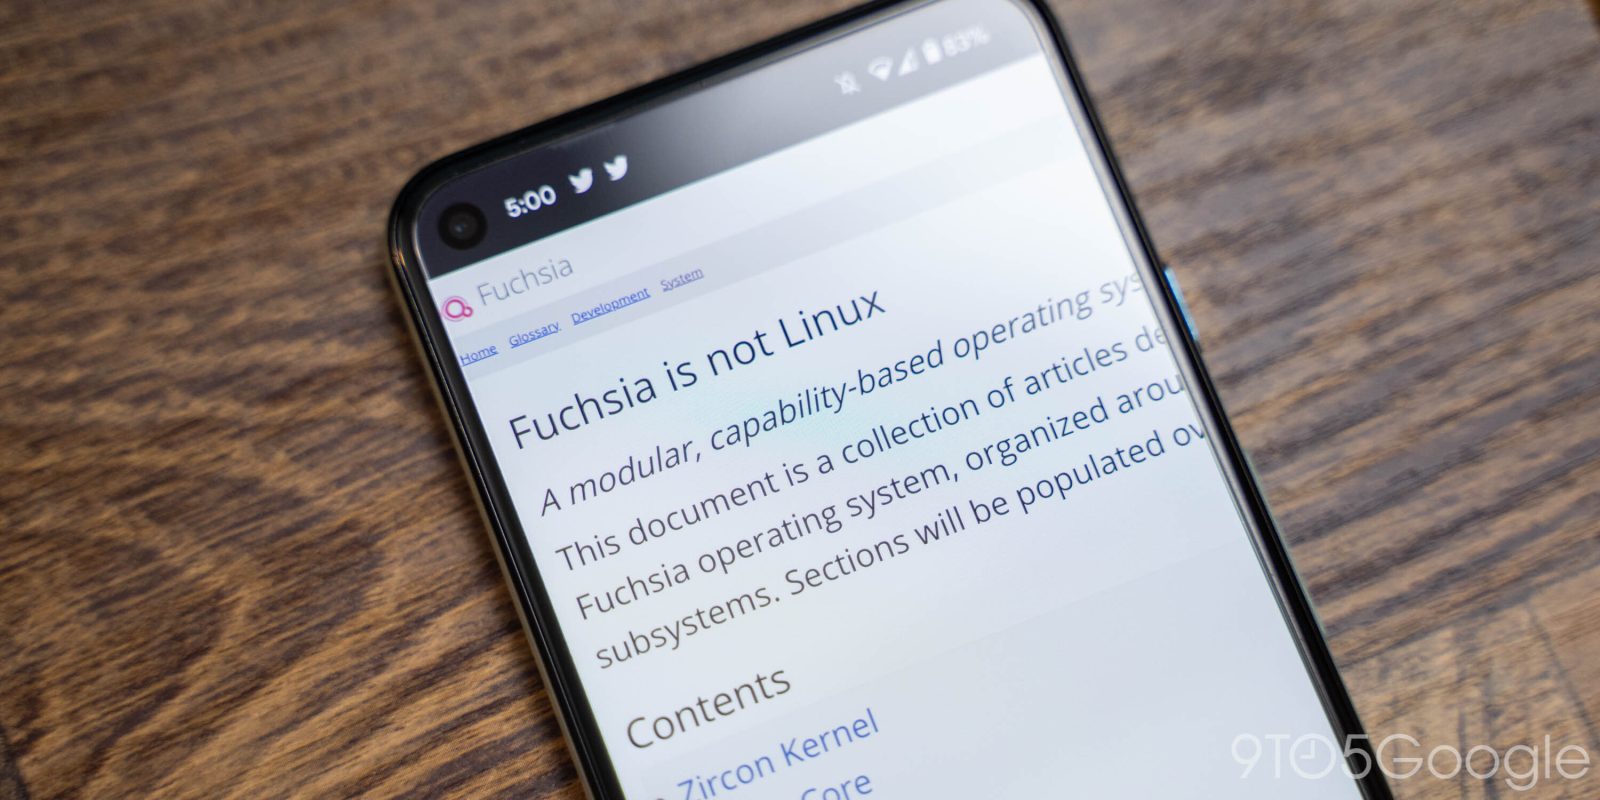 Google's Fuchsia OS "is not Linux"